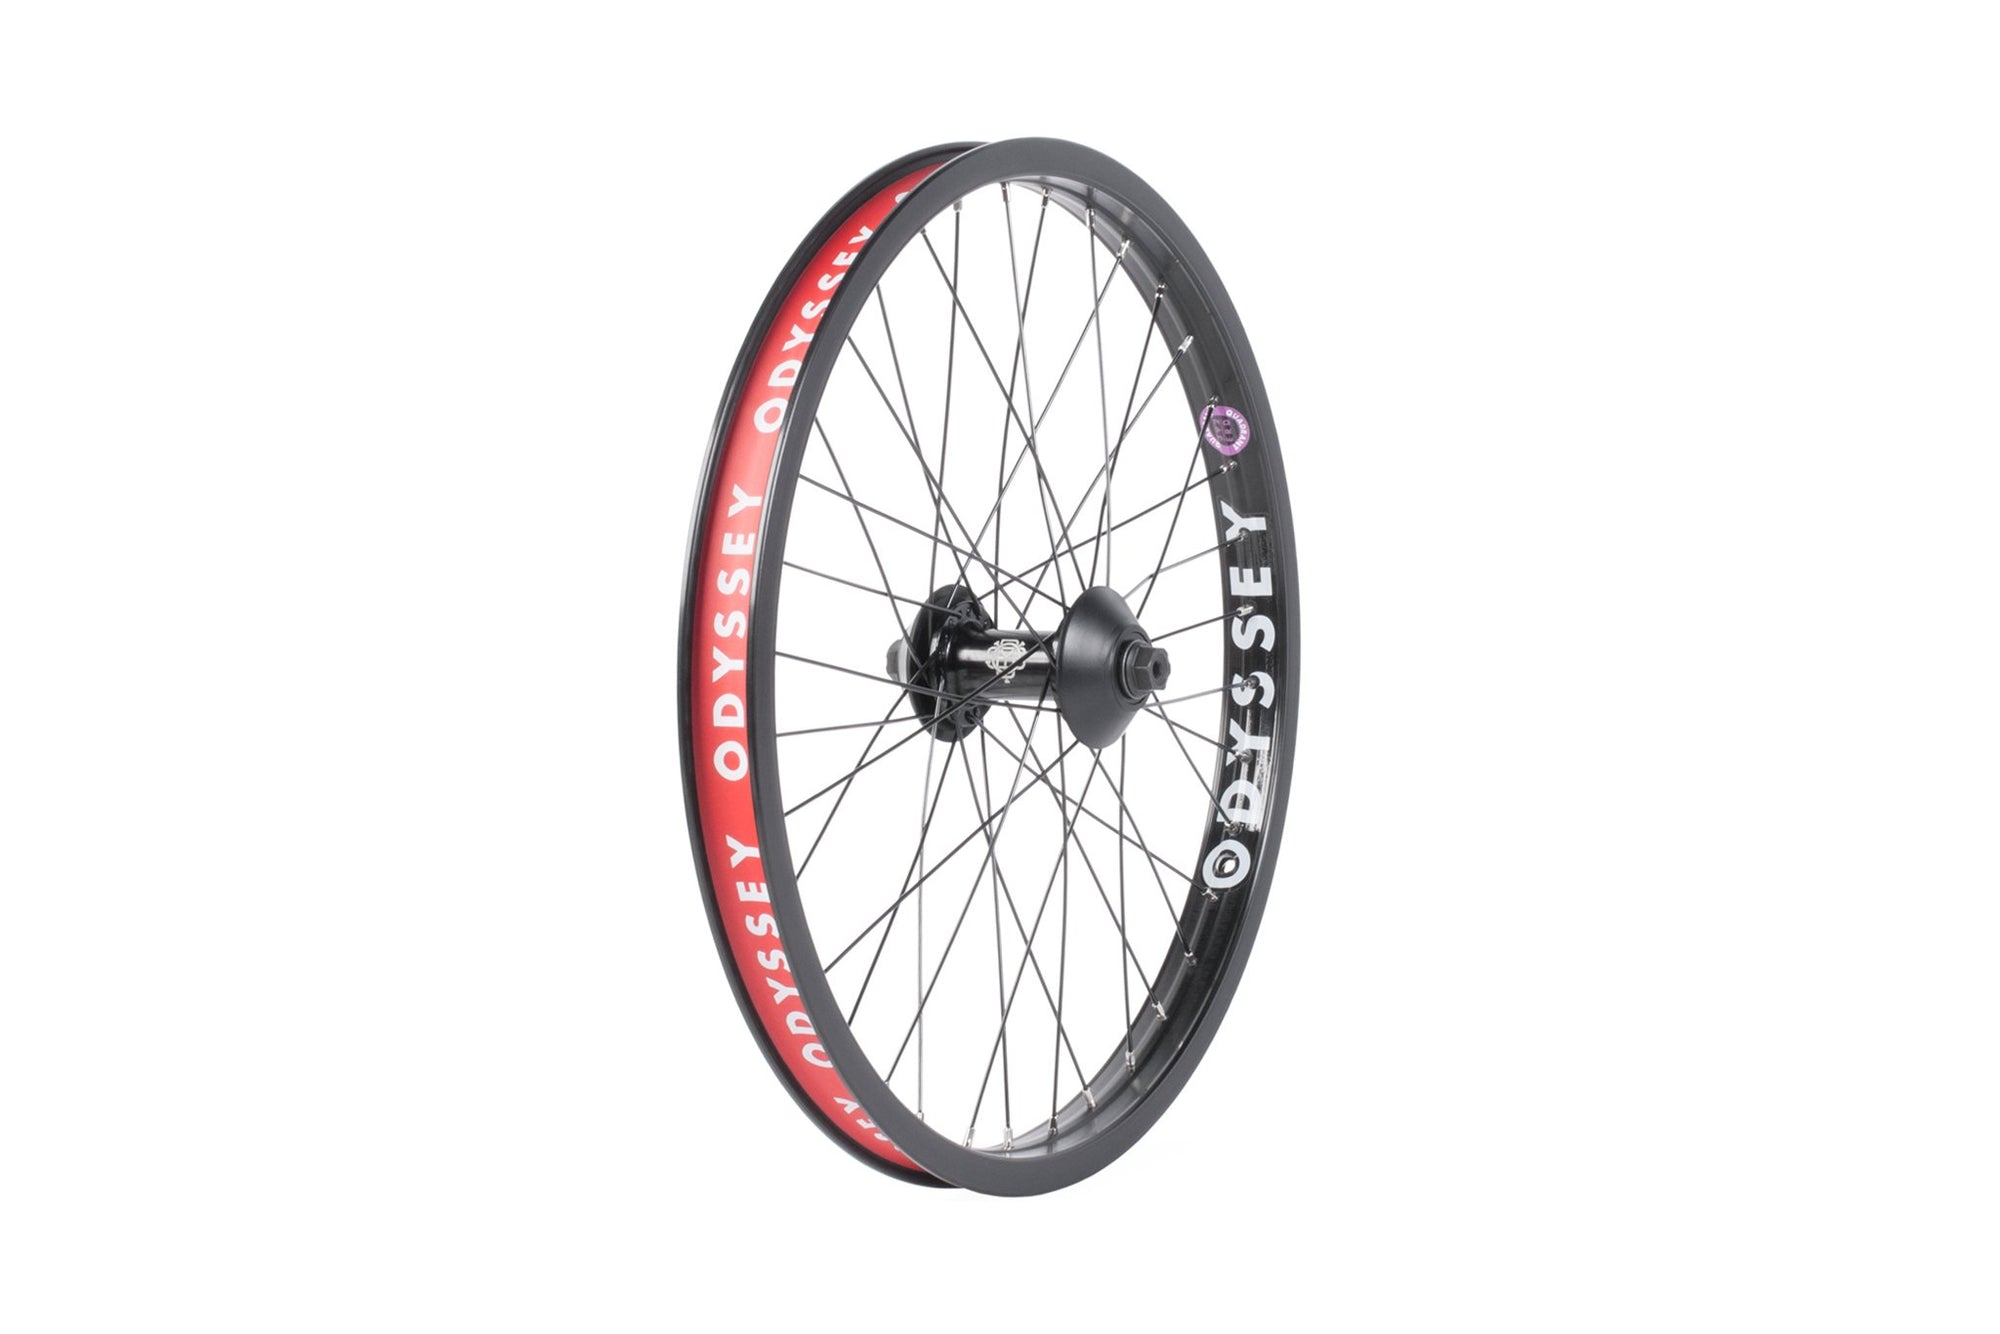 Odyssey Quadrant Front Wheel - Downtown Bicycle Works 